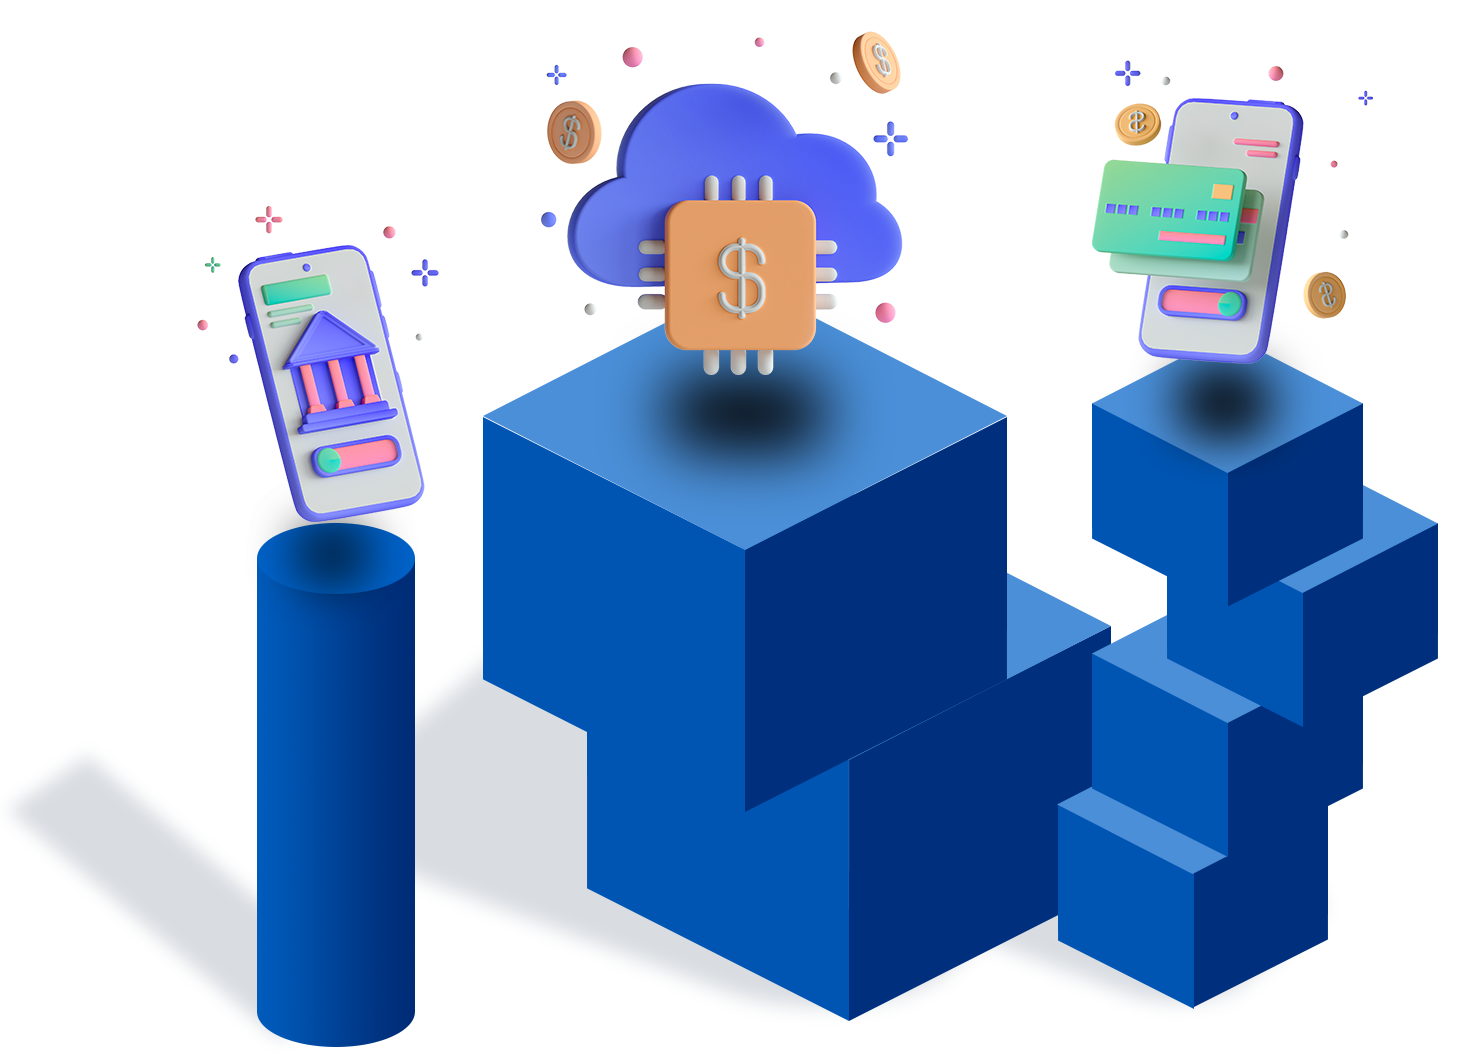 1 blue cylinder, two stacked big blue cubes, and four haphazardly stacked blue cubes, hovering above is online currency graphic in the middle and two online banking phone graphics on either side